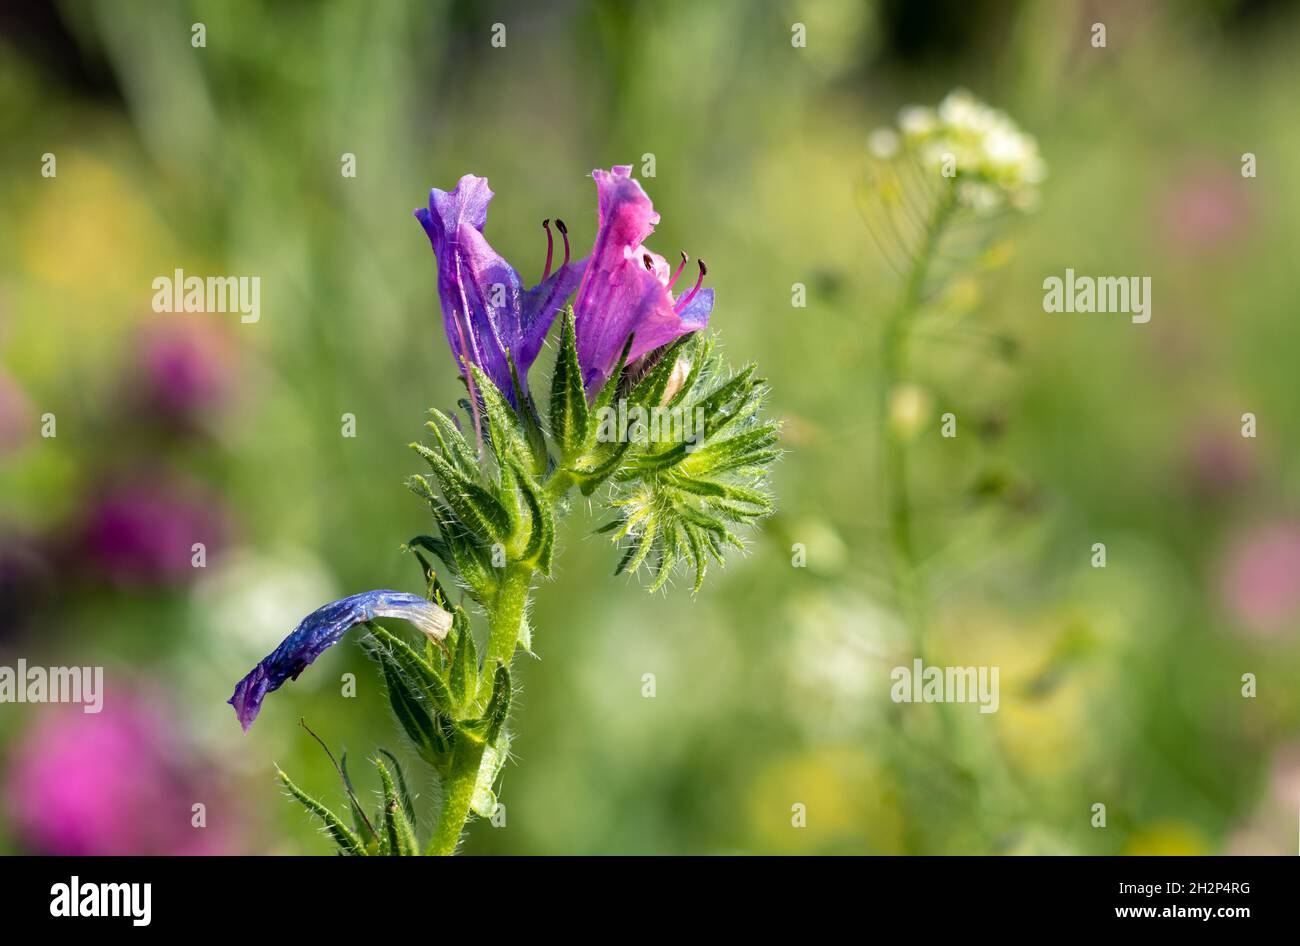 Viper's Bugloss flower blooming on the sunny meadow. Blurred background. Echium vulgare. Stock Photo